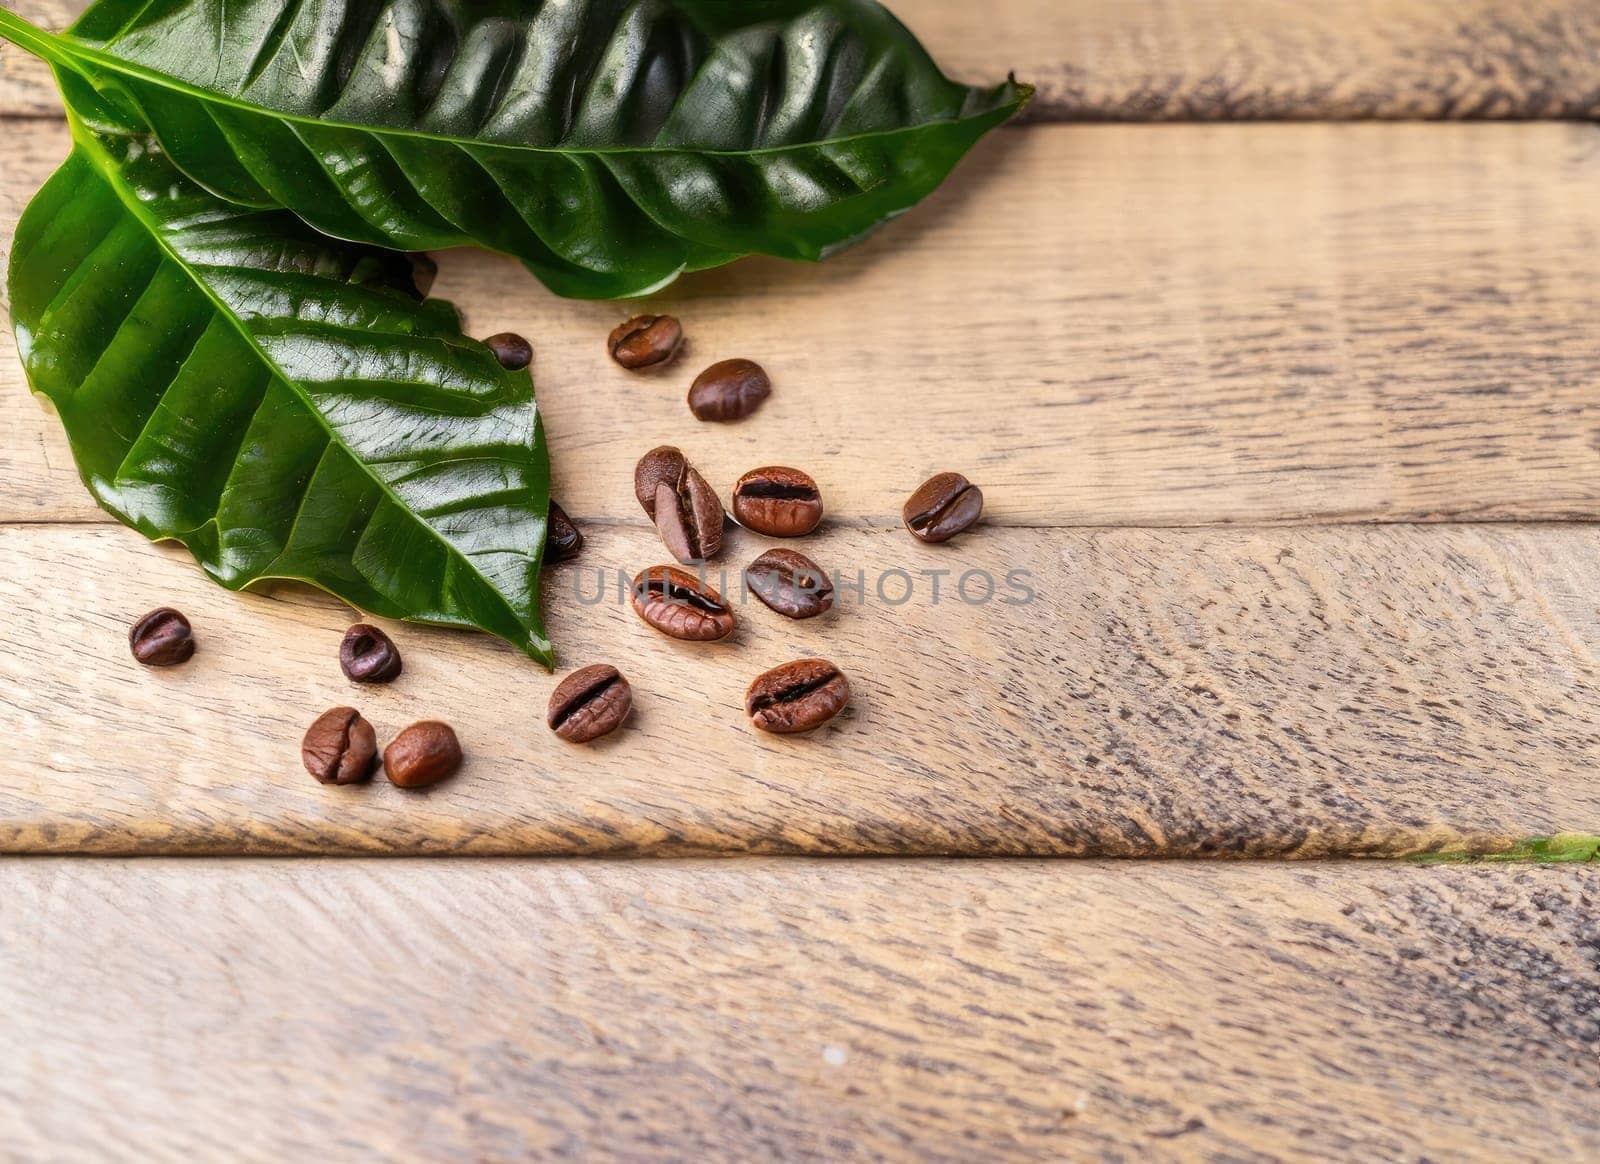 coffee seed and coffee leaf frame with floor copy space background